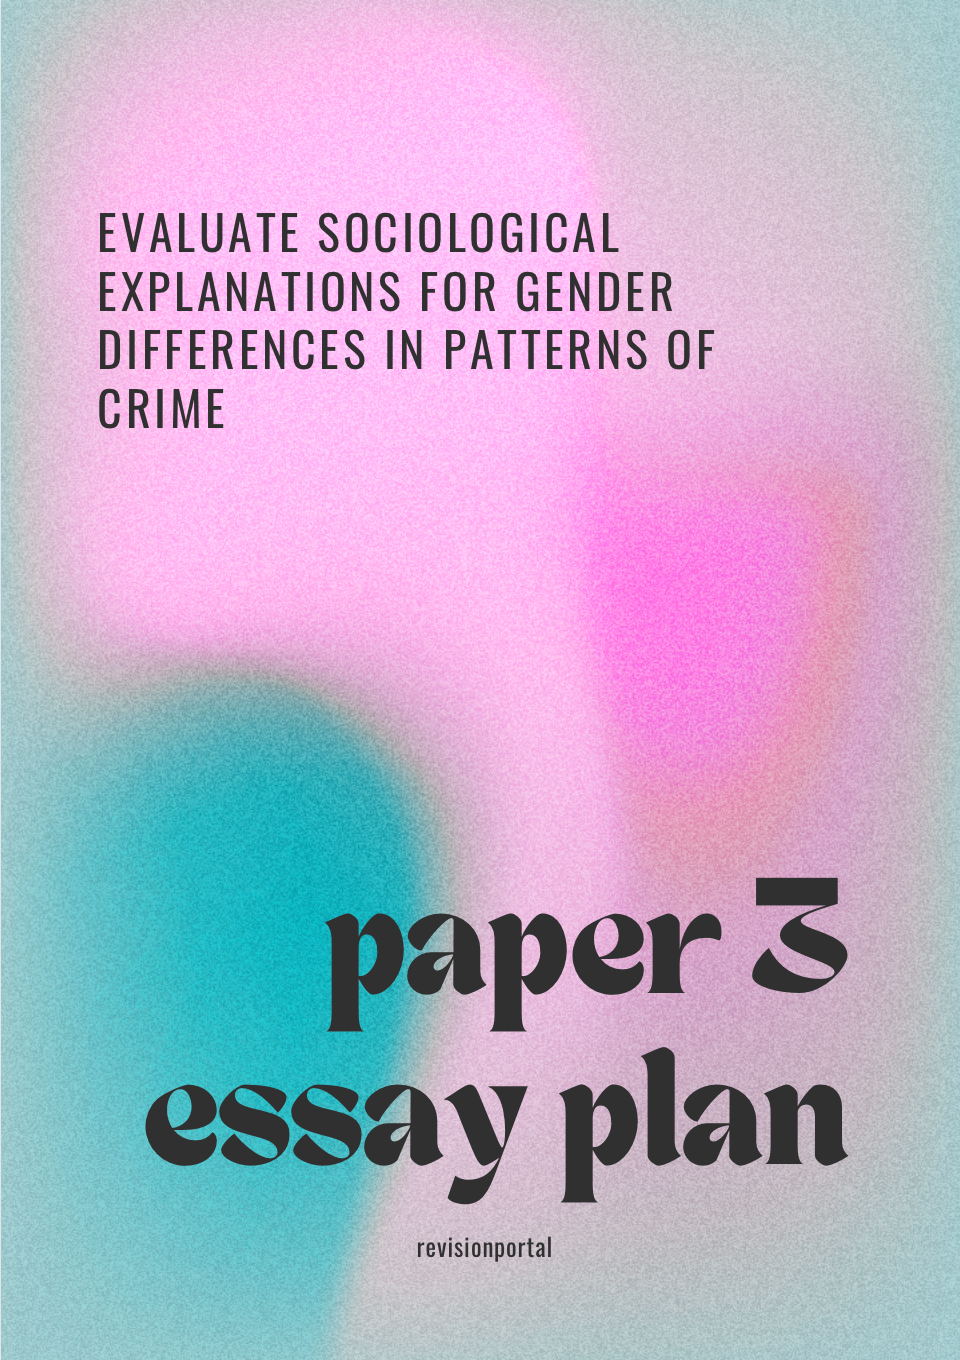 A* sociology essay plan - Evaluate sociological explanations for gender differences in patterns of crime